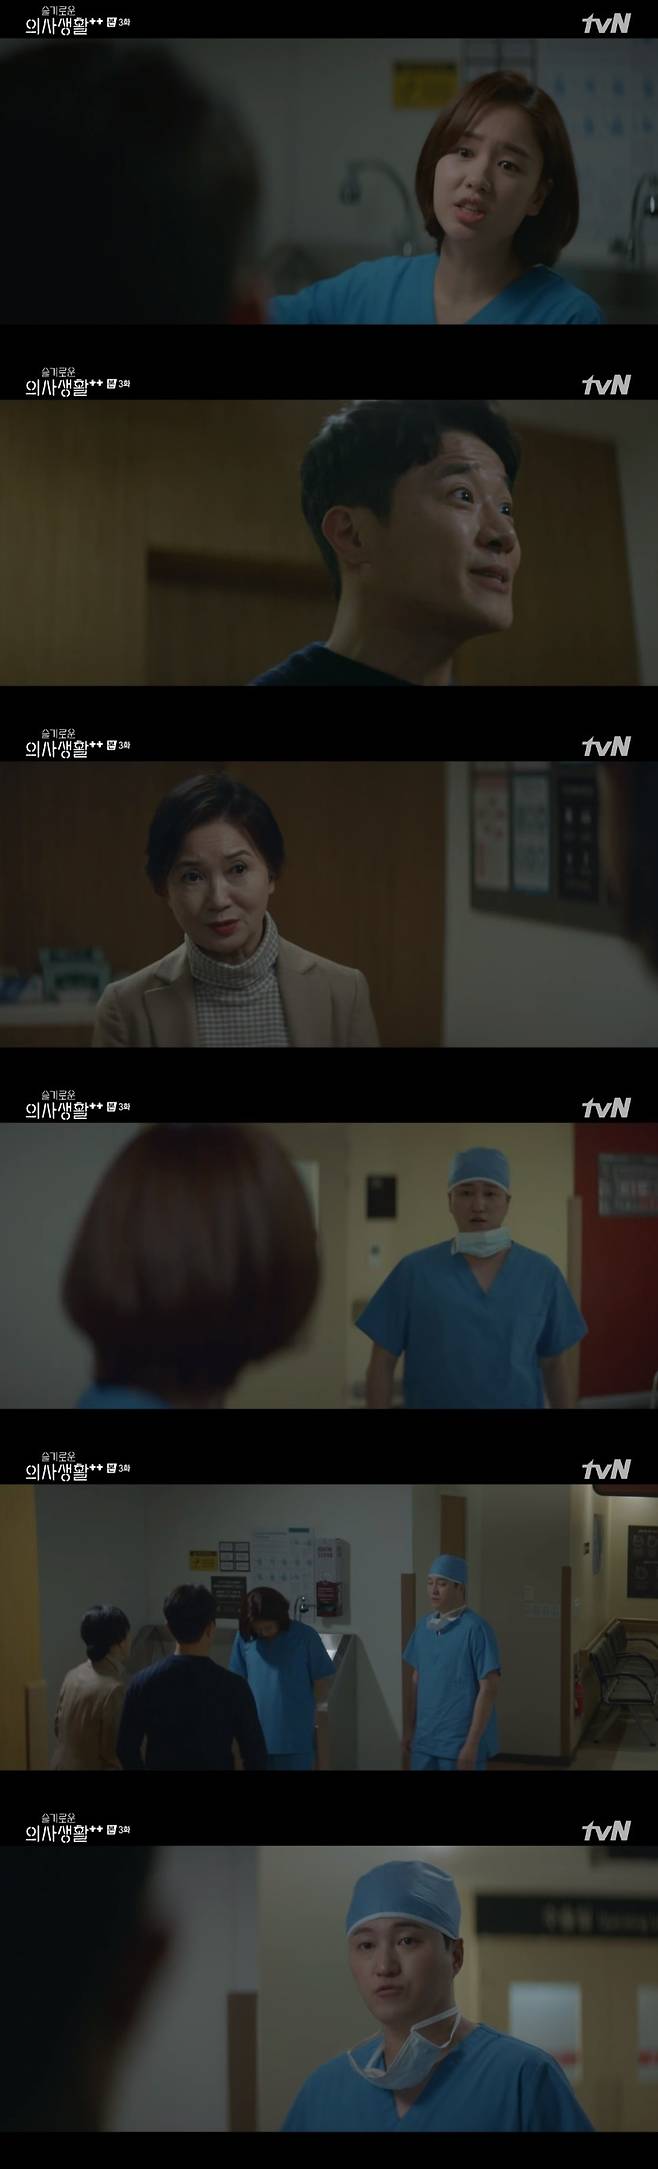 Seoul = = Sweetness 2 Kim Dae-myung made a step toward the hat (child) who insisted on Natural.In the TVN Thursday afternoon drama Sick Doctor Life Season 2 (Sweet Doctor 2), Yang Seok-hyung, an obstetrician, was contacted by Chu Min-ha (Ahn Eun-jin) and hurried to Yulje Hospital.With one mother in an emergency, the mothers husband and mother-in-law insisted that she should do natural without any condition. Chu Min-ha continued to persuade her.My mother and baby are all dangerous now, I have to operate because I can not come down for more than three hours, he said urgently.Nevertheless, Mother-in-law asked me to promise my daughter-in-law, to be natural. Do a little more and do not you have to operate then?Thats now, Chu Min-ha said, its just a little bit, and then its like this. Its an emergency.Yang Seok-hyung, who appeared at this time, was frustrated with Chu Min-ha and shouted, What are you doing now?Mother-in-law then stepped back and said, Natural is smart, but you can not try a little more. We had two nights and three days.Yang Seok-hyung said, Natural is the goal, and we aim to have a baby healthy and a mother healthy child.Its too late now, we need surgery, the mother agreed, were going into surgery now, he said firmly. Yang Seok-hyungs charisma no longer required natural.